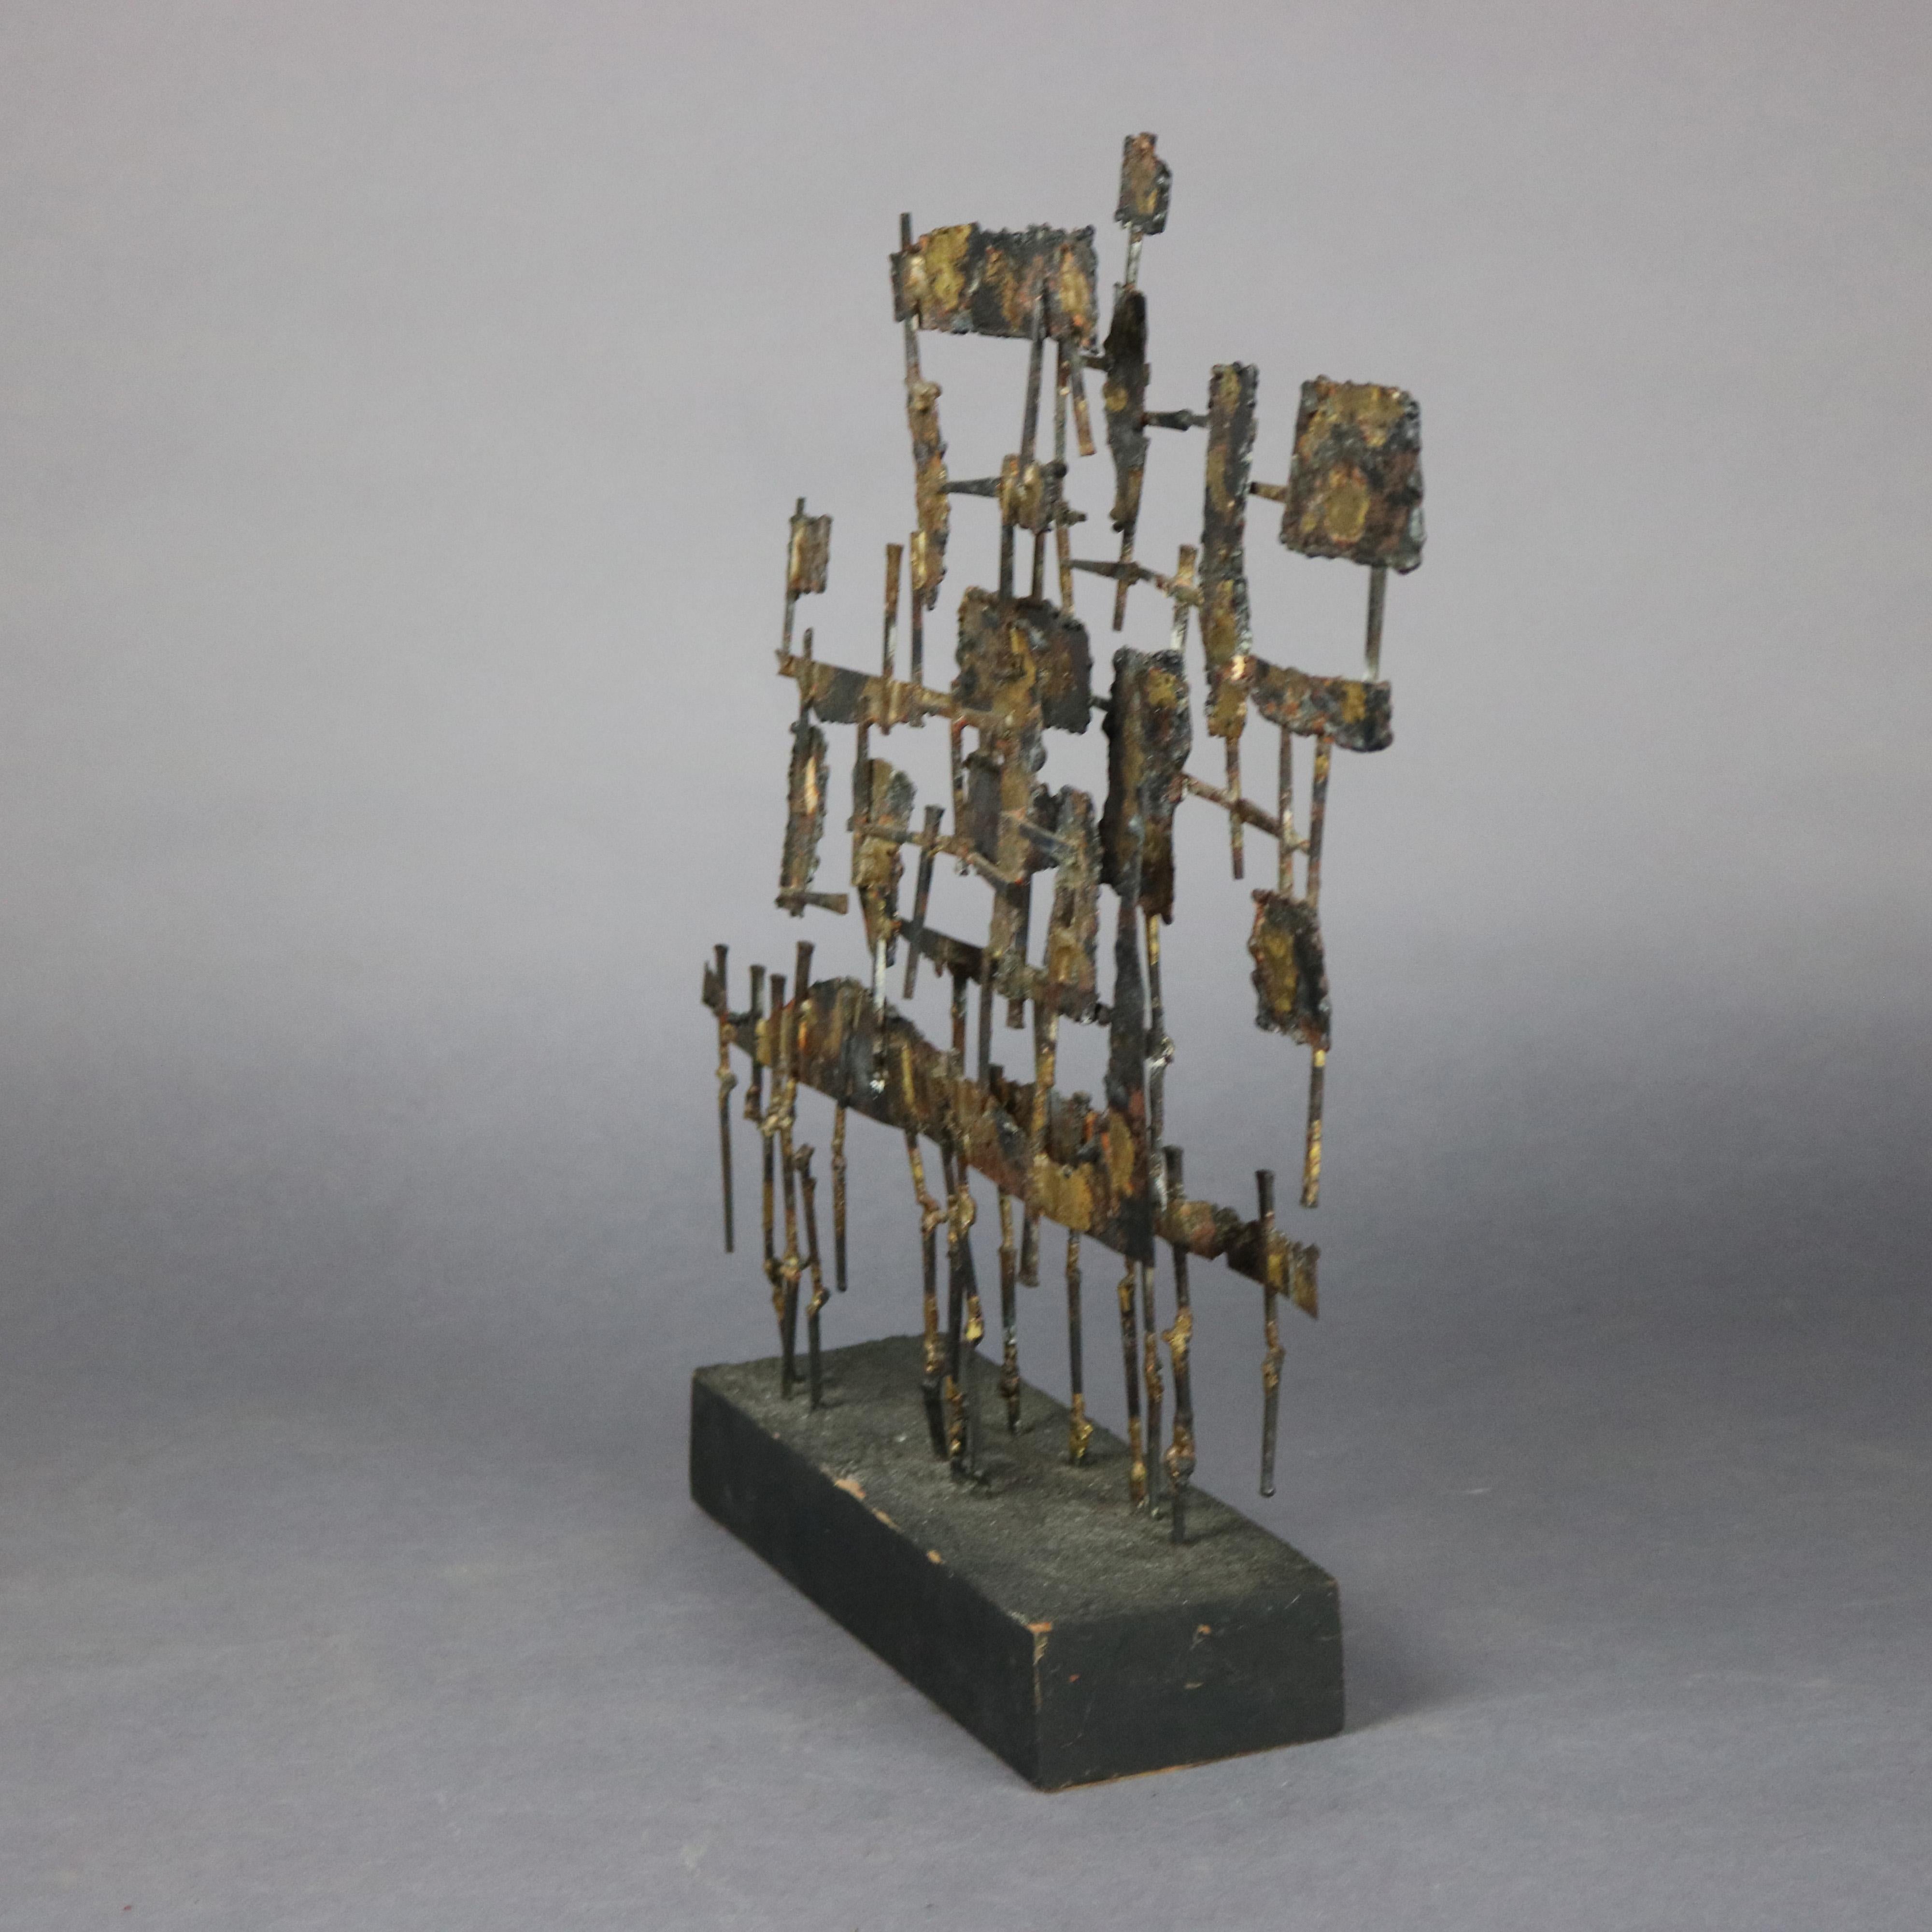 A Mid-Century Modern Brutalist sculpture offers metal construction with raised geometric elements, unsigned, circa 1960.

Measures: 17.75